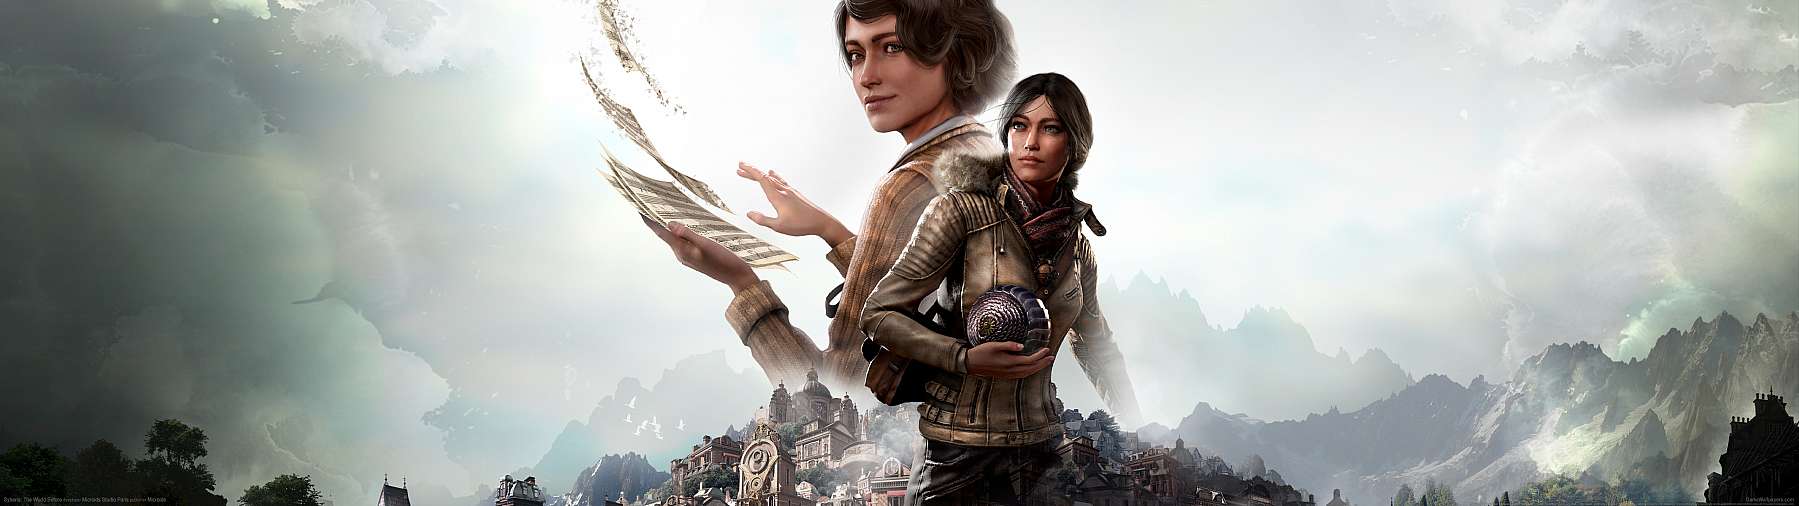 Syberia: The World Before superwide fond d'cran 01